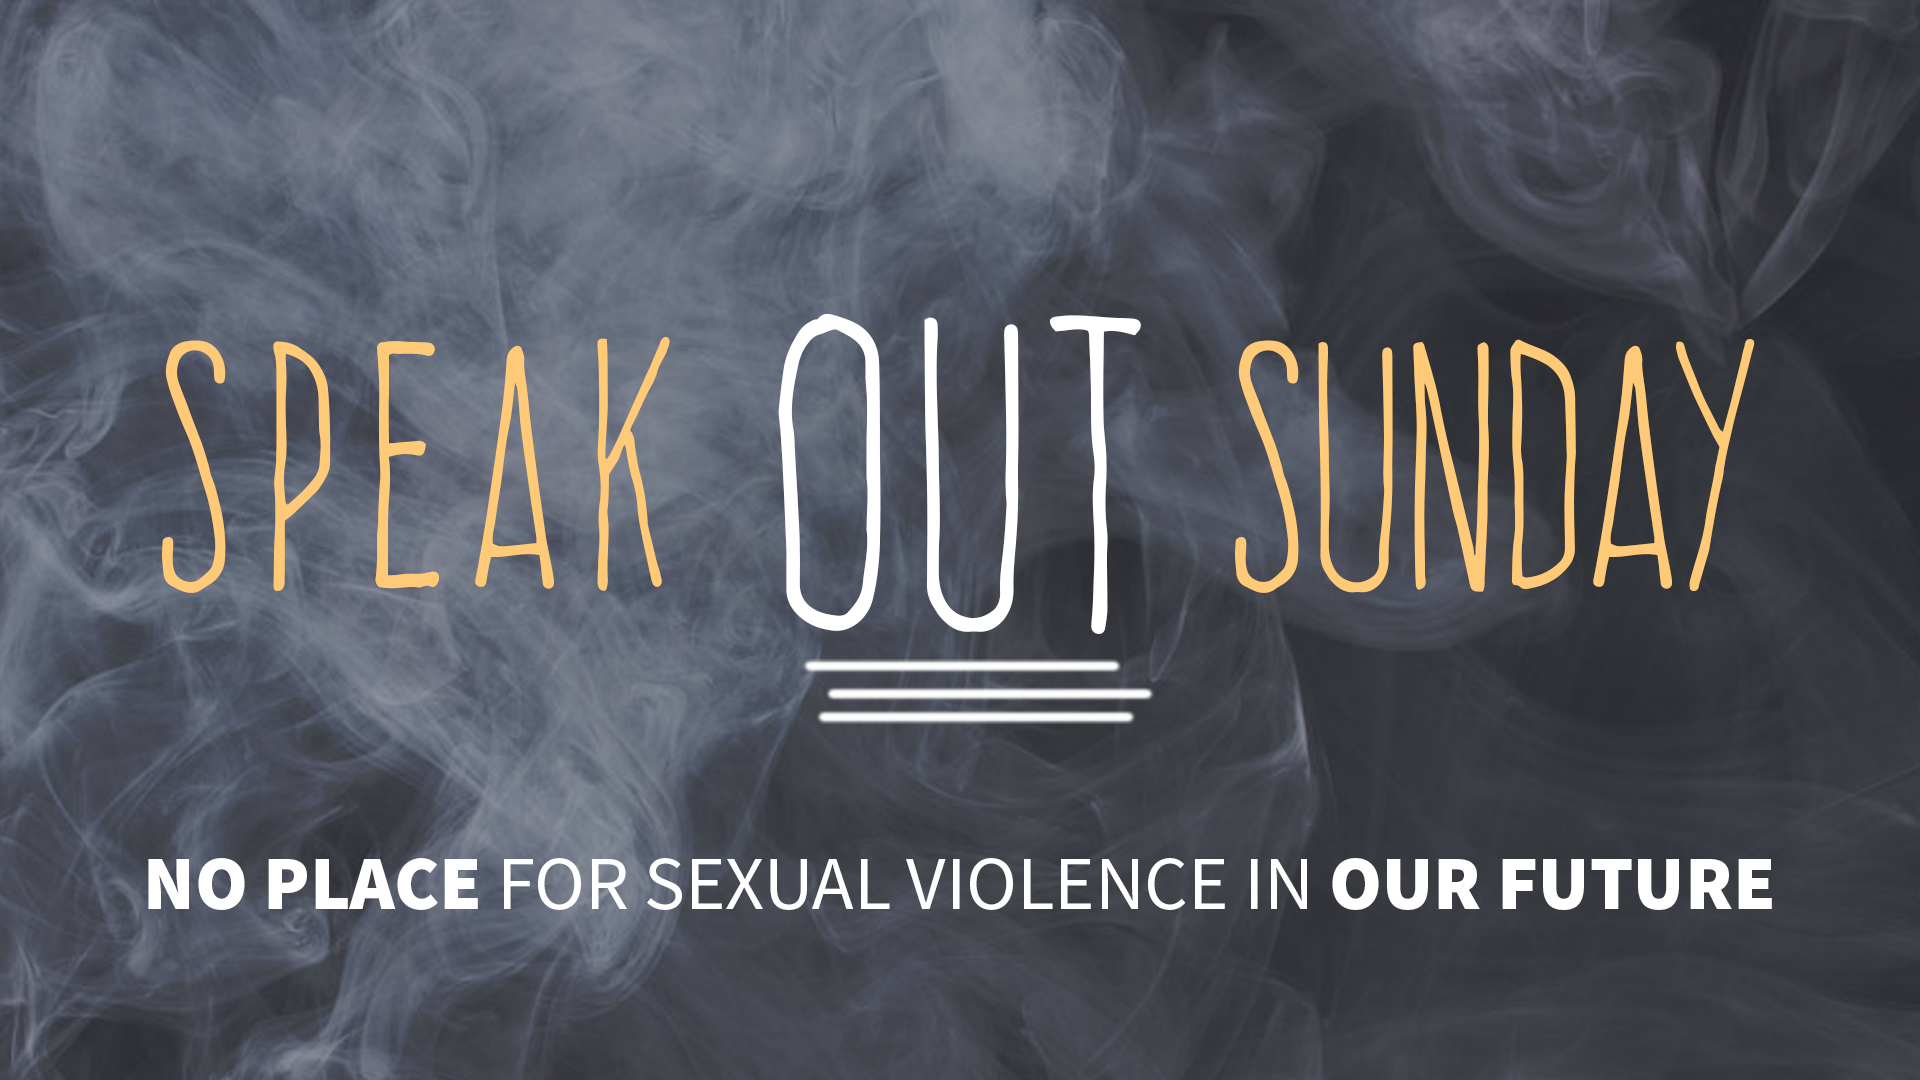 Speak Out Sunday: No Place for Sexual Violence in Our Future